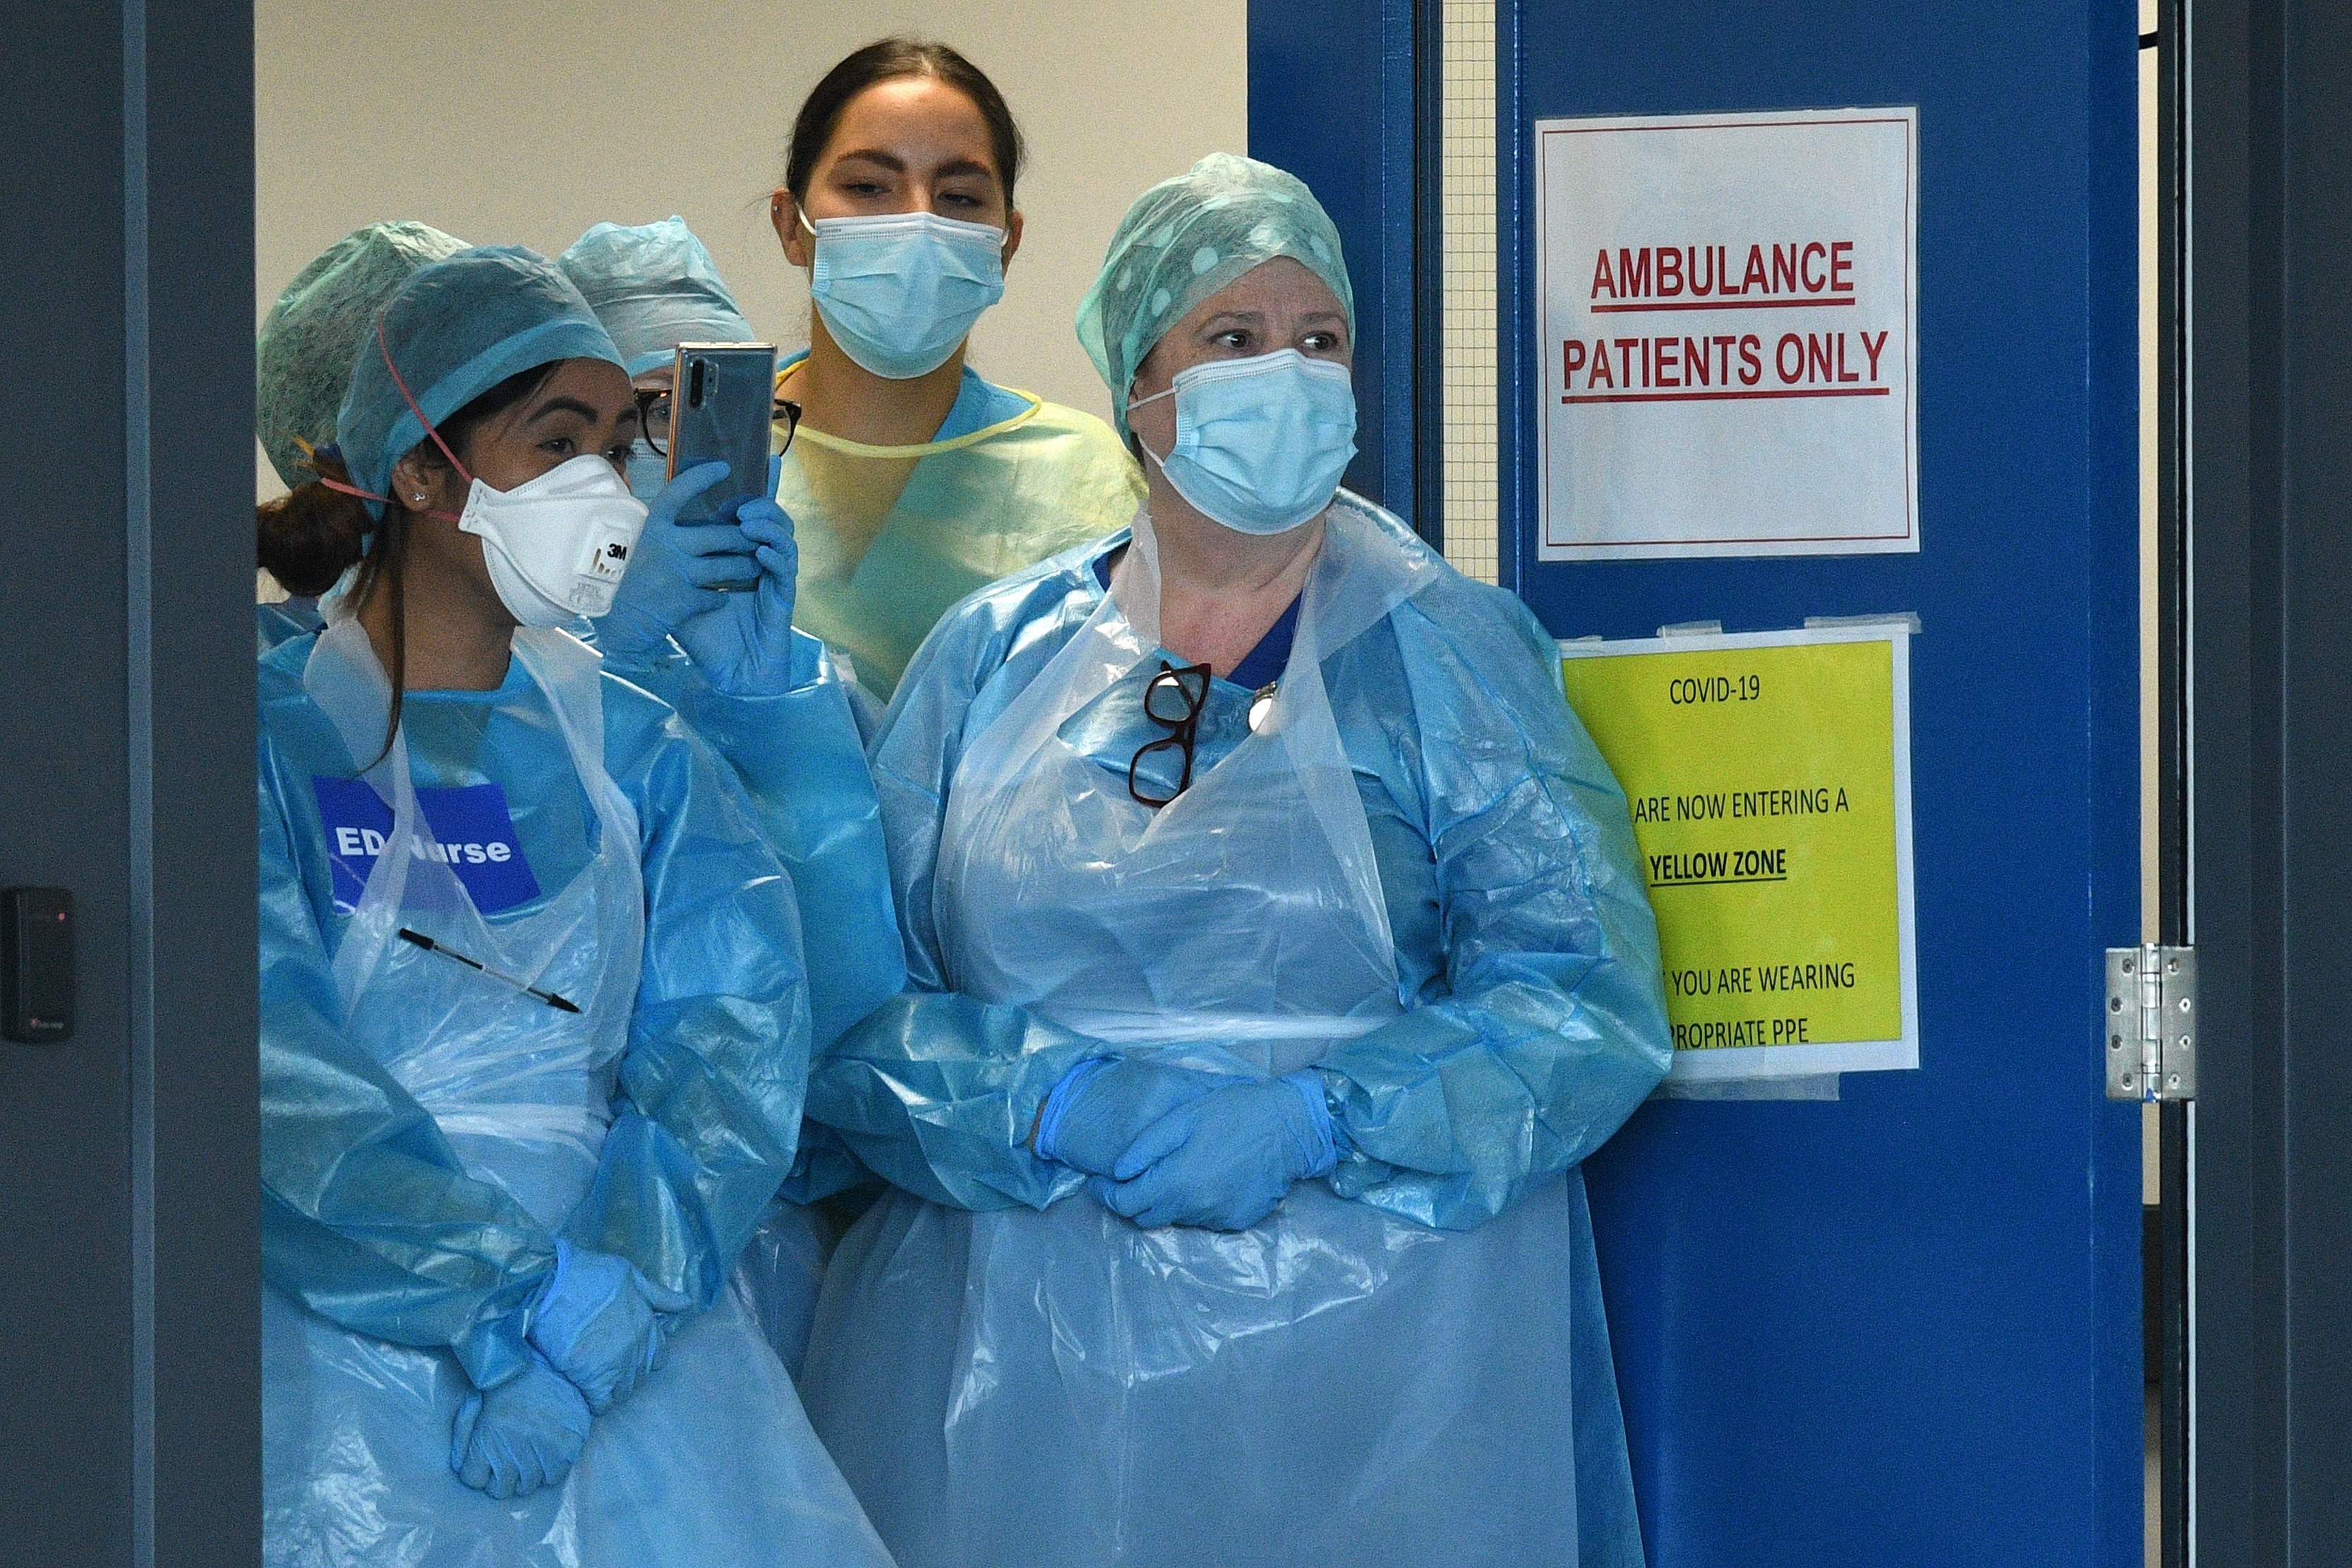 NHS workers wearing PPE (personal protective equipment), including a face mask, gloves and aprons